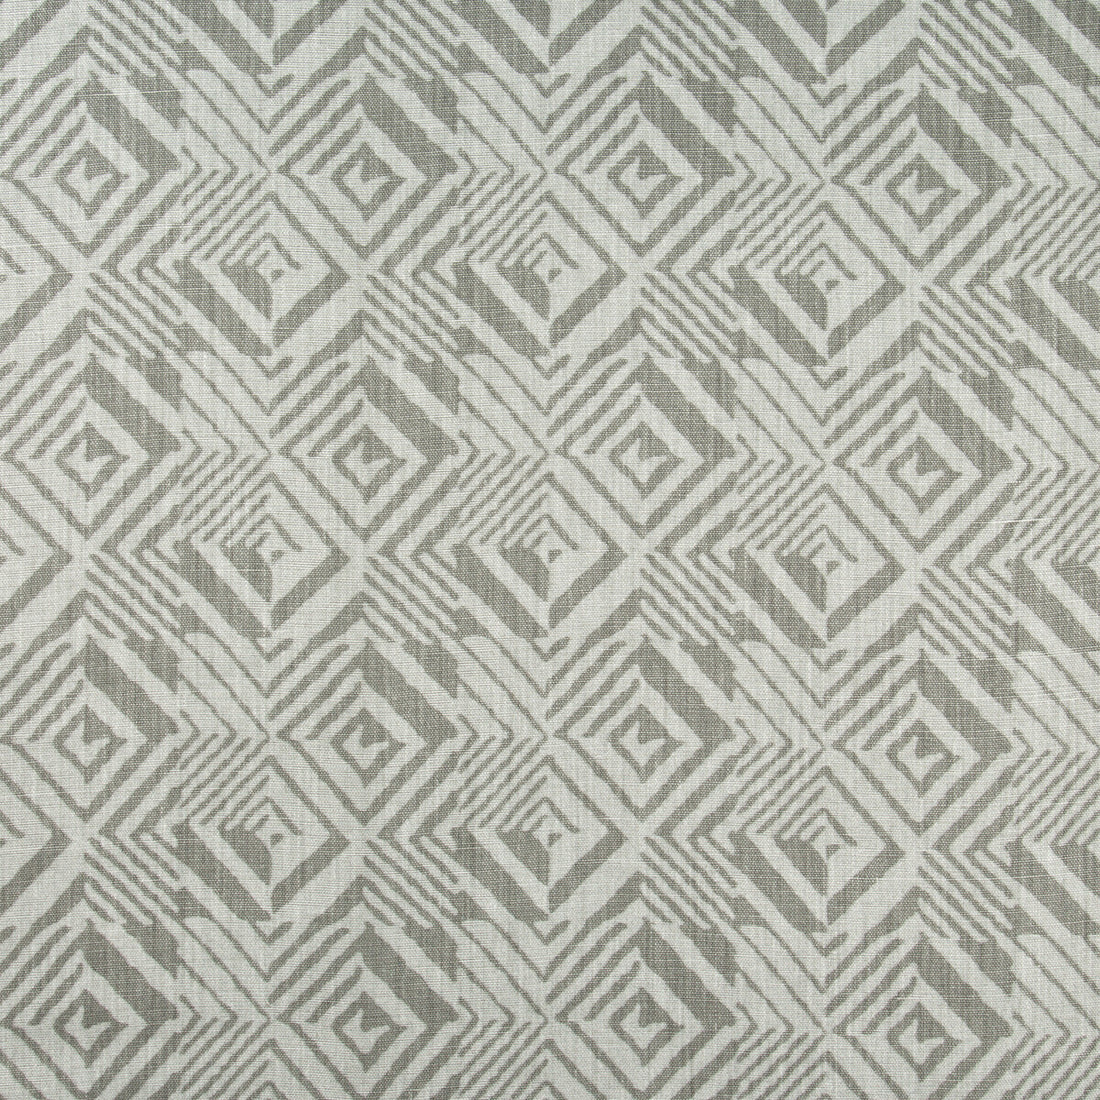 Doyen fabric in pewter color - pattern DOYEN.21.0 - by Kravet Couture in the Sue Firestone Malibu collection